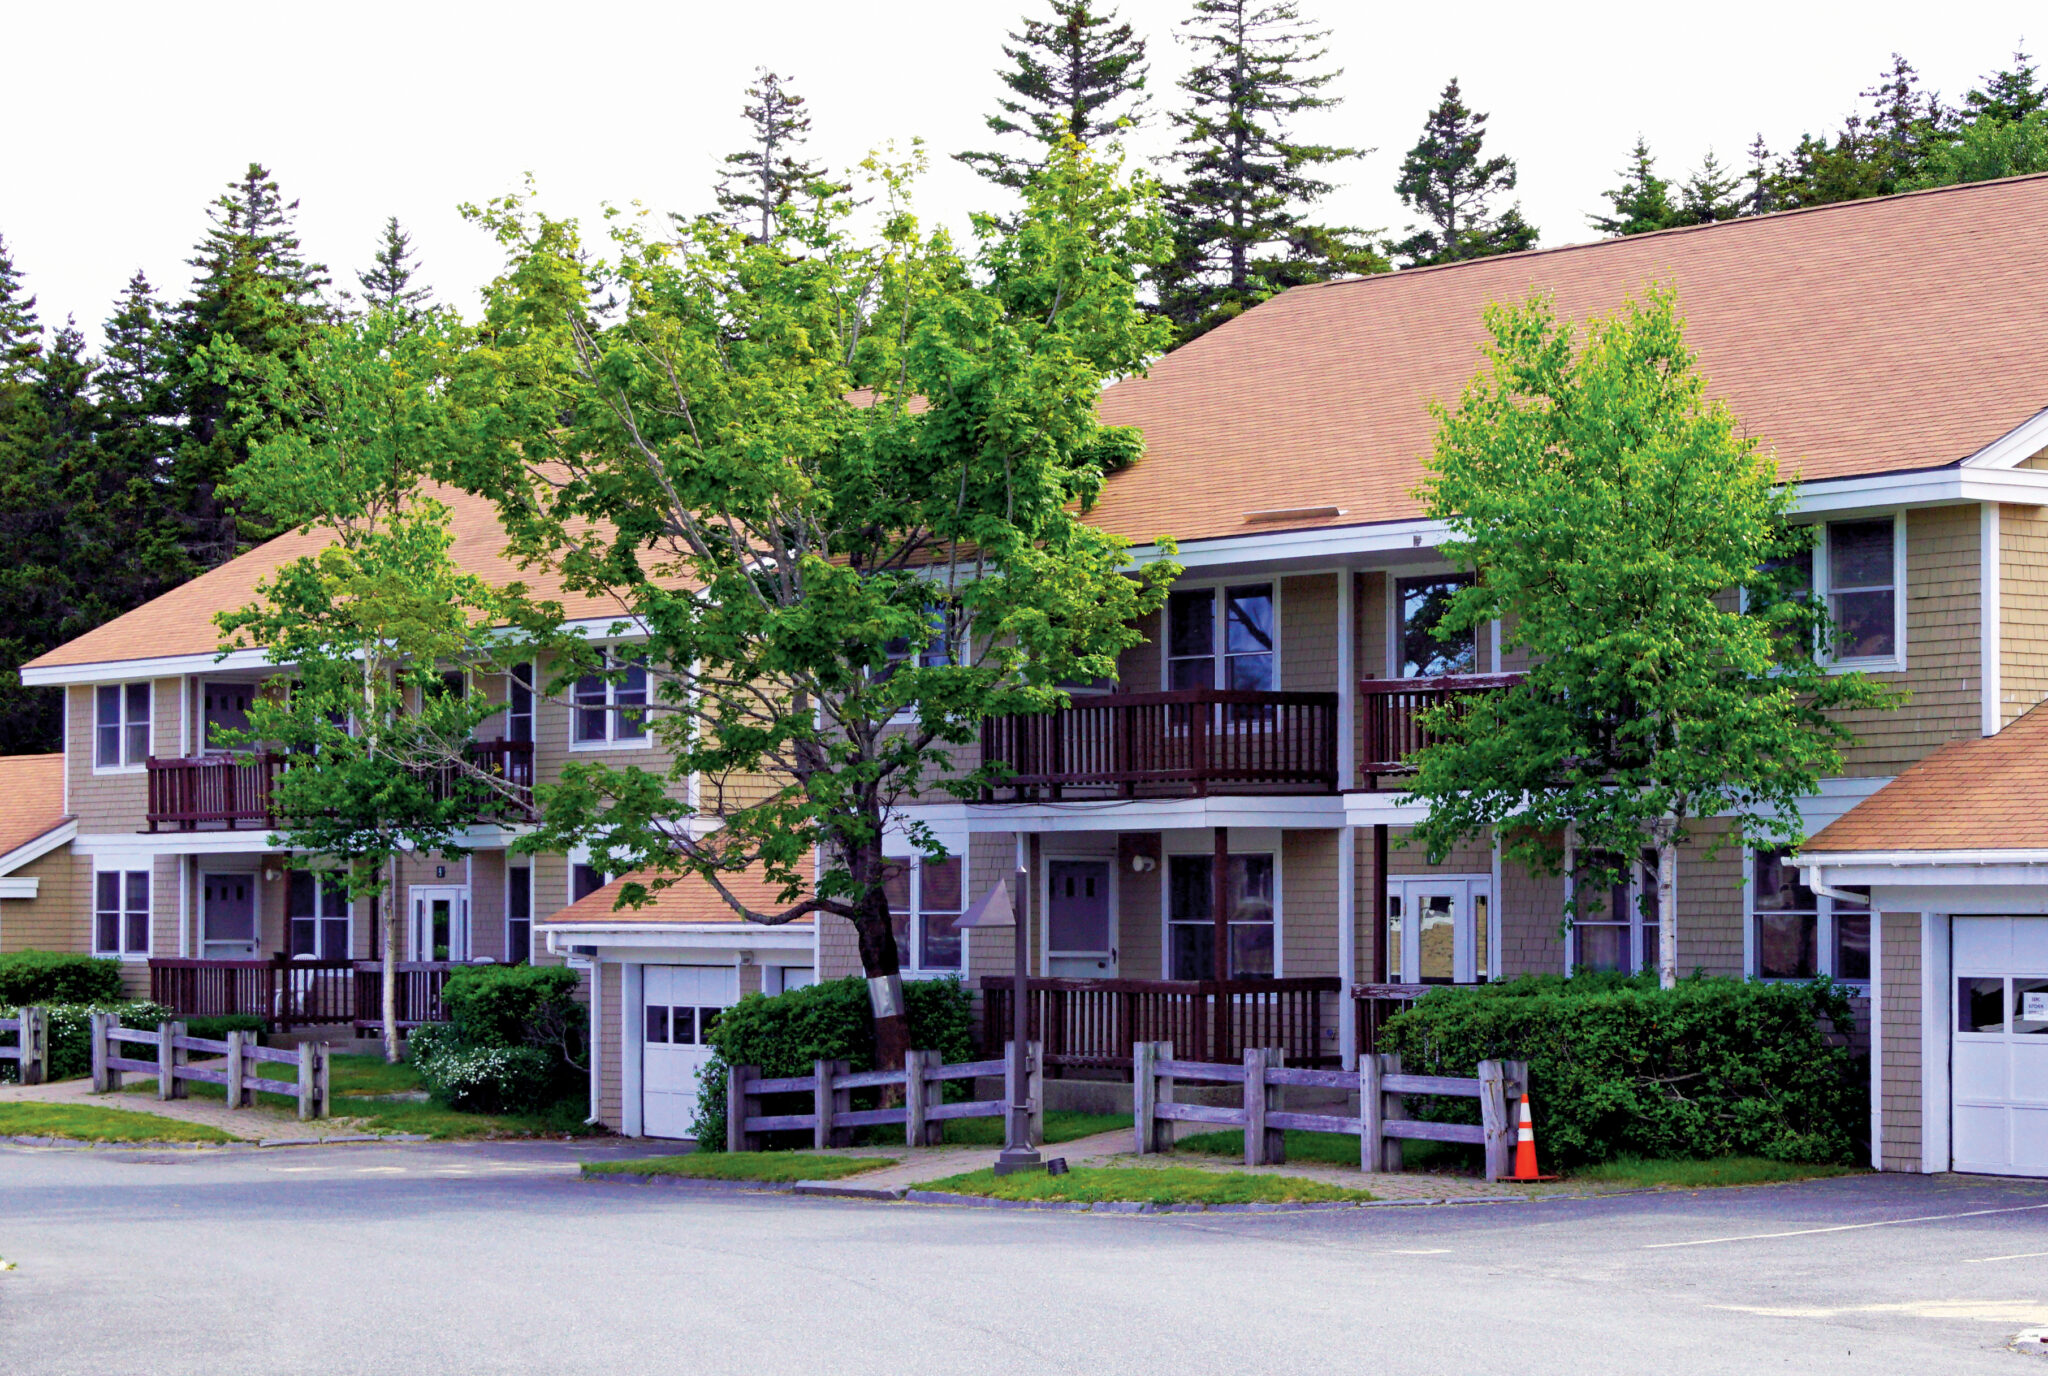 Street view the Schoodic Shores apartments at Schoodic Institute.